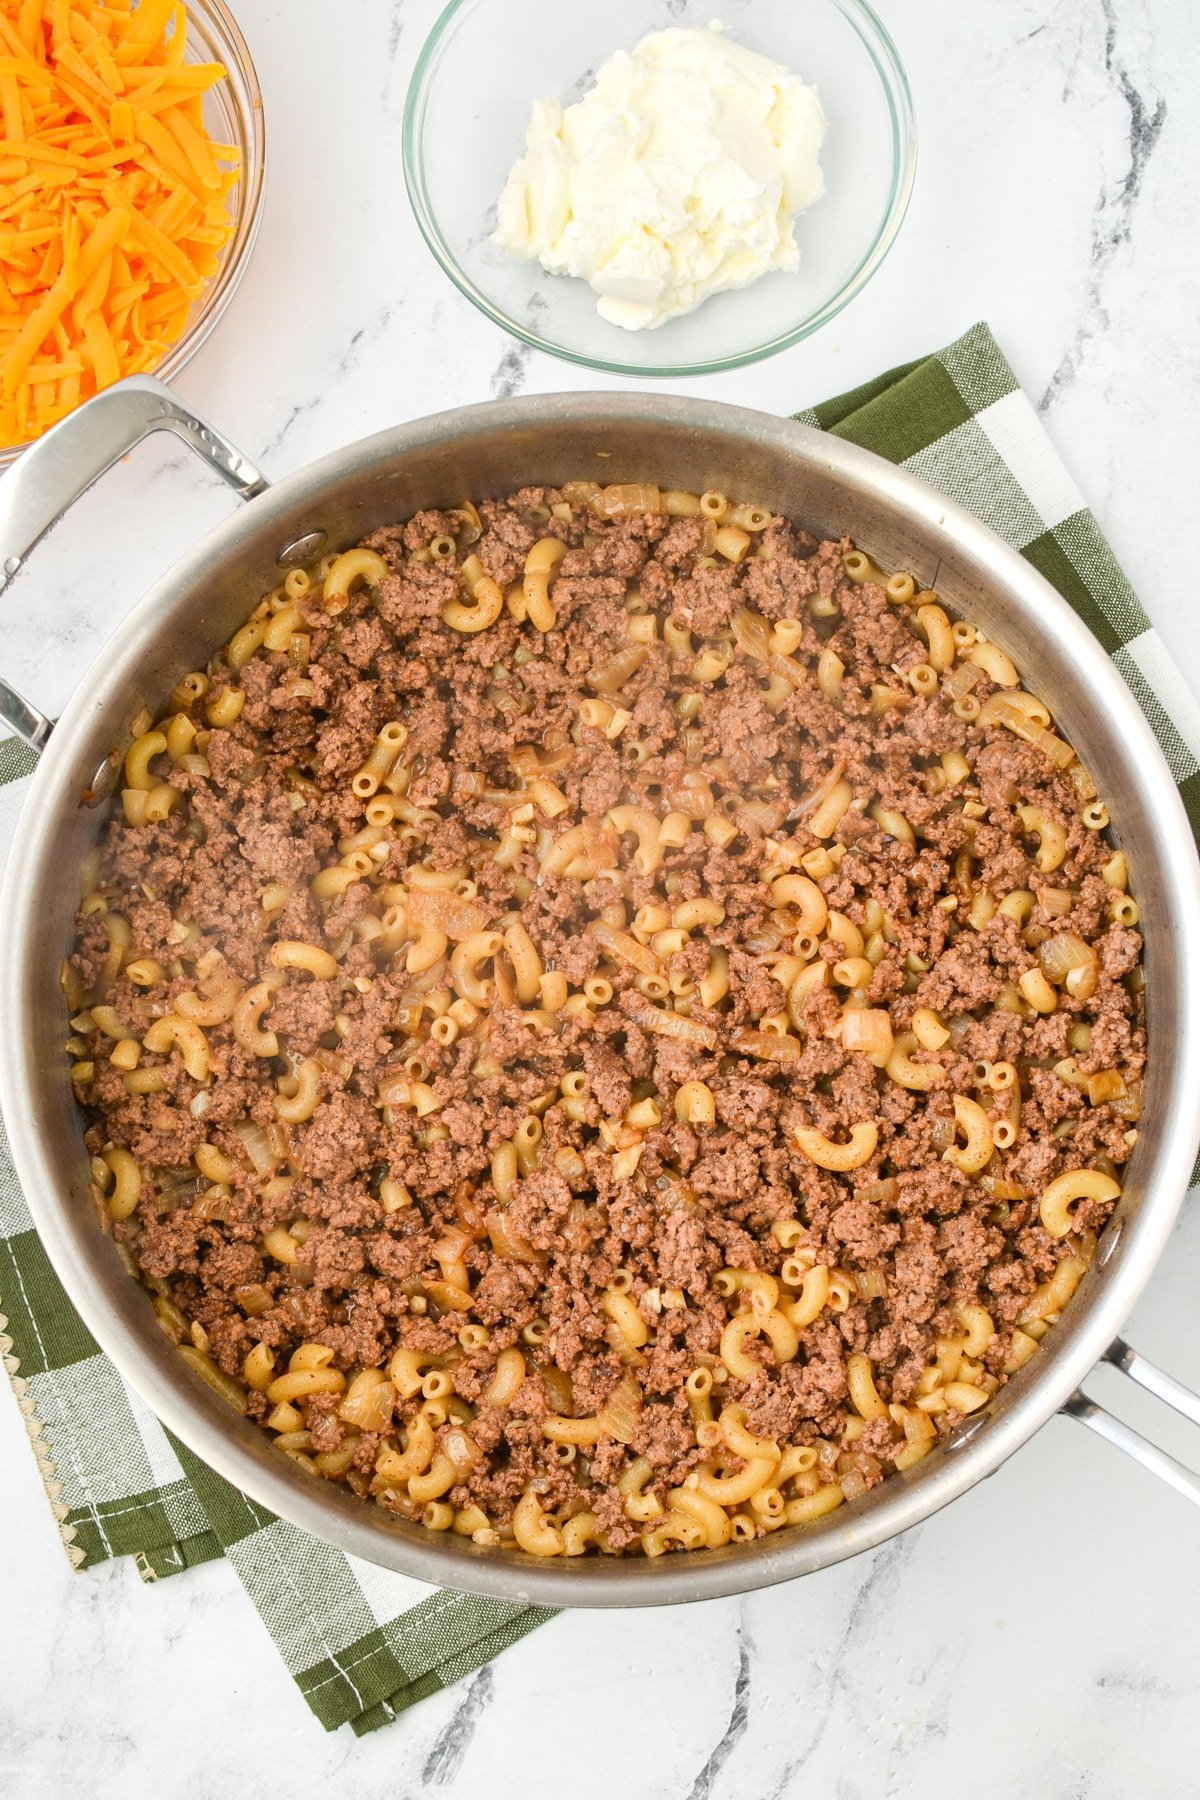 A skillet with ground beef and macaroni.